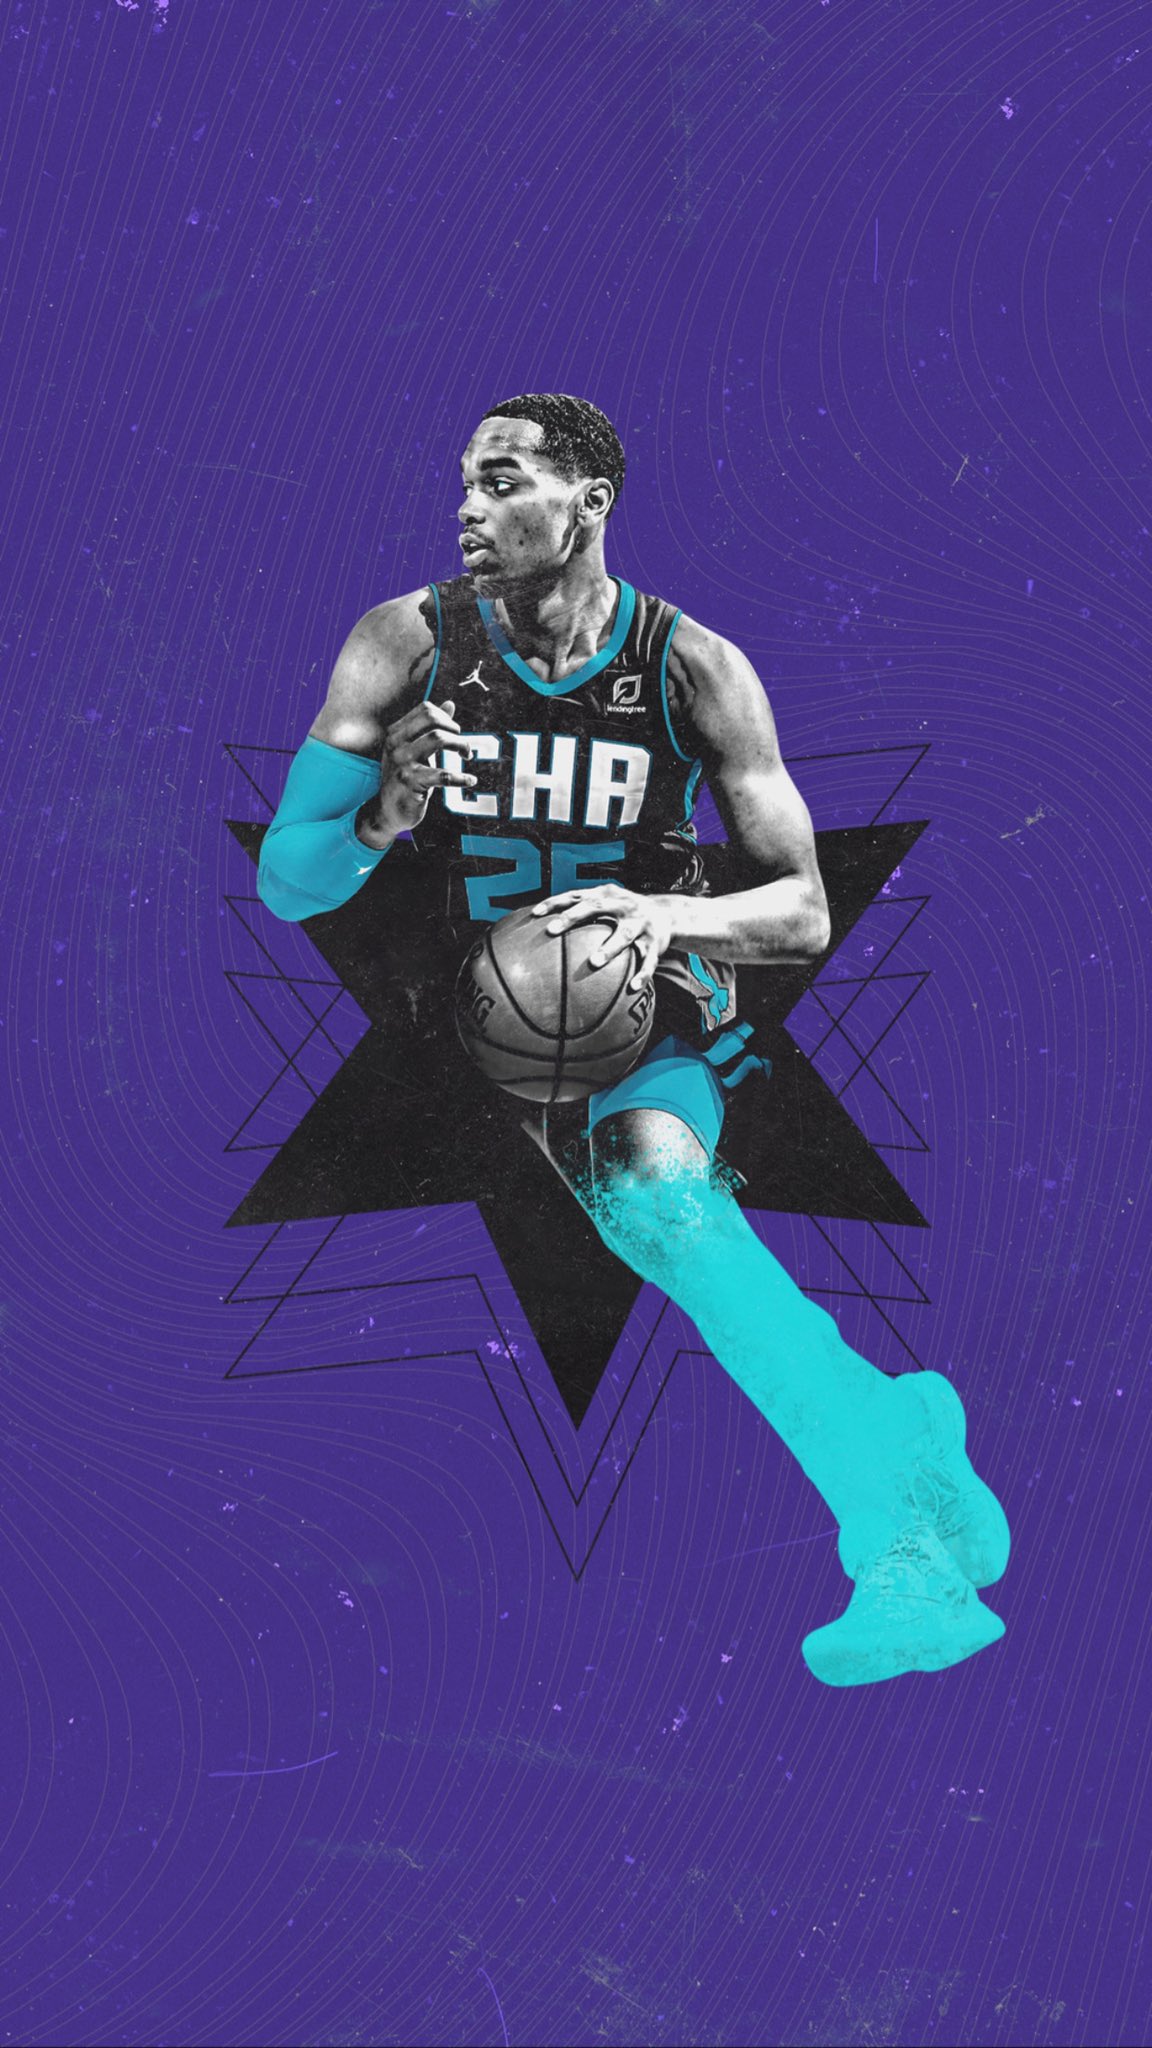 Charlotte Hornets - IT'S STAR WARS DAY!!!! 🛰️🚀👽 May the force